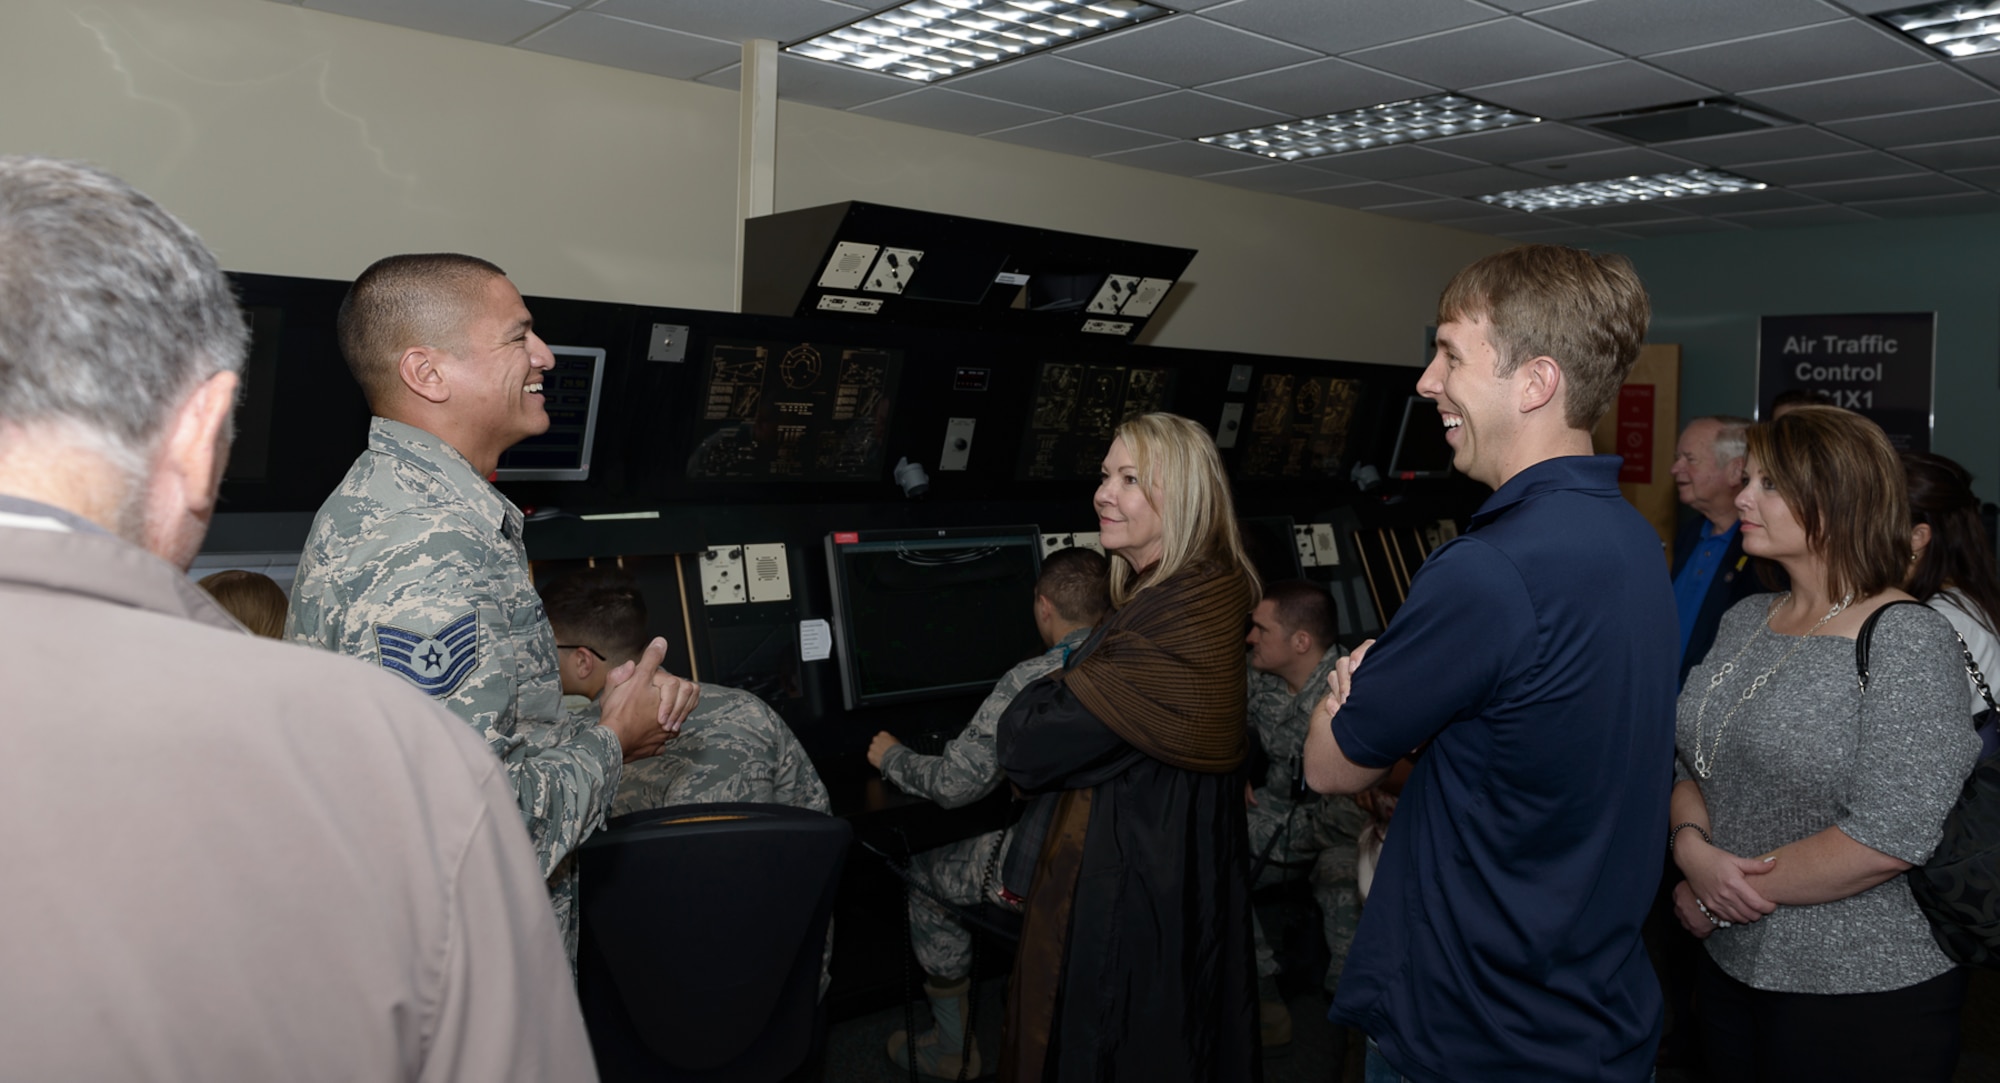 Tech Sgt. Hugh Cross, 334th Training Squadron instructor, briefs 81st Training Wing honorary commanders on the function of the Radar Performance Training Lab at Cody Hall, Mar. 30, 2017, on Keesler Air Force Base, Miss. The visit highlighted the training mission of the 81st Training Group for 81st TRW honorary commanders. (U.S. Air Force photo by Andre’ Askew)     